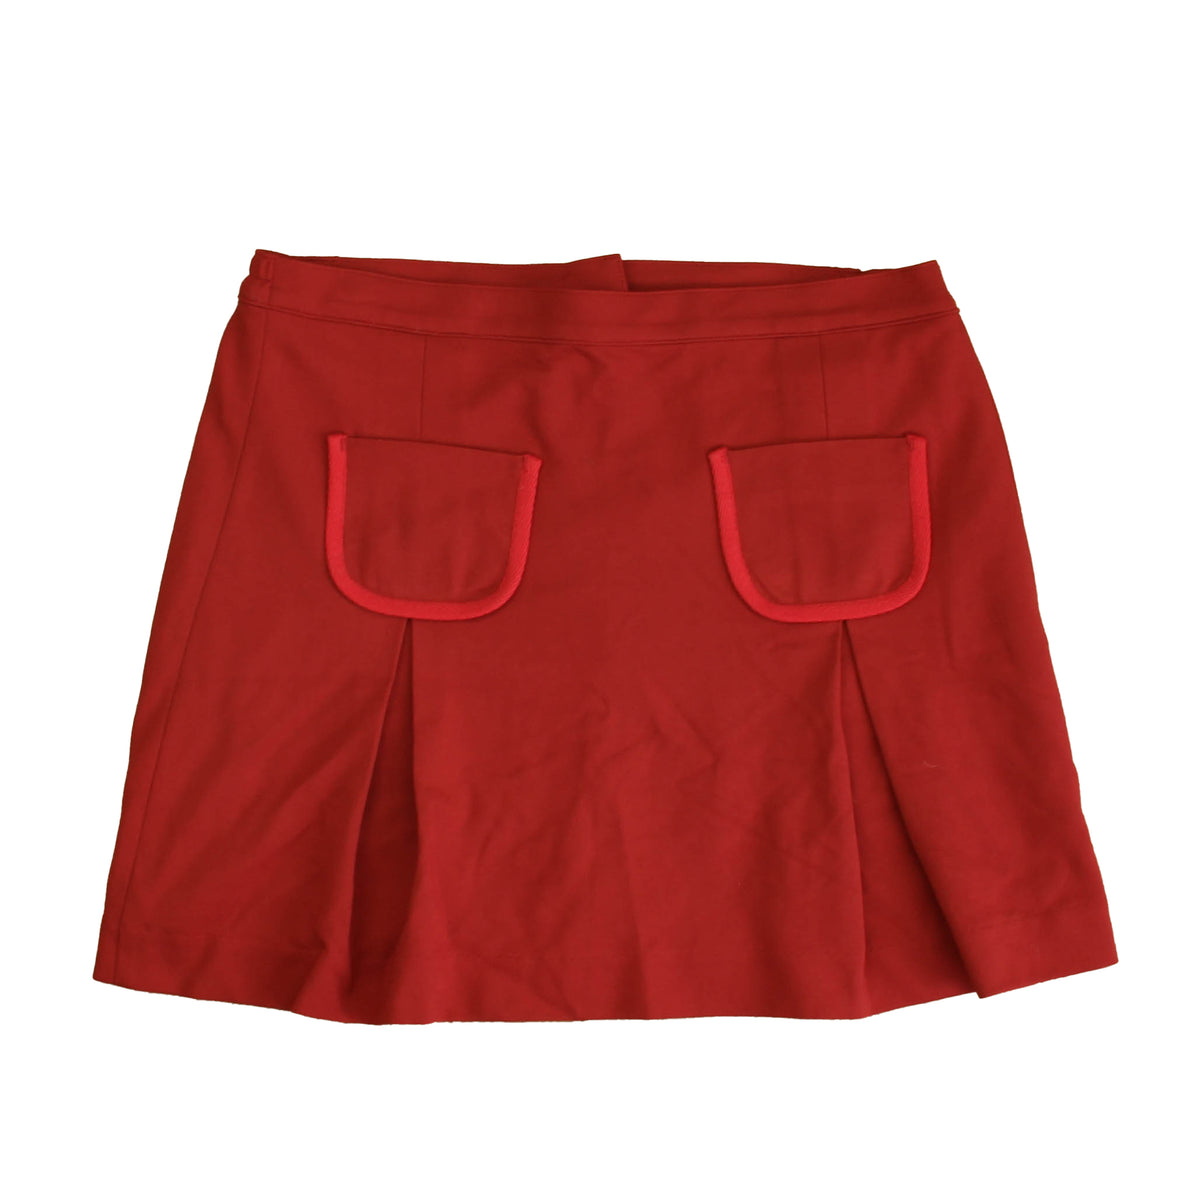 New with Tags: Maroon Skirt size: 6-14 Years -- FINAL SALE